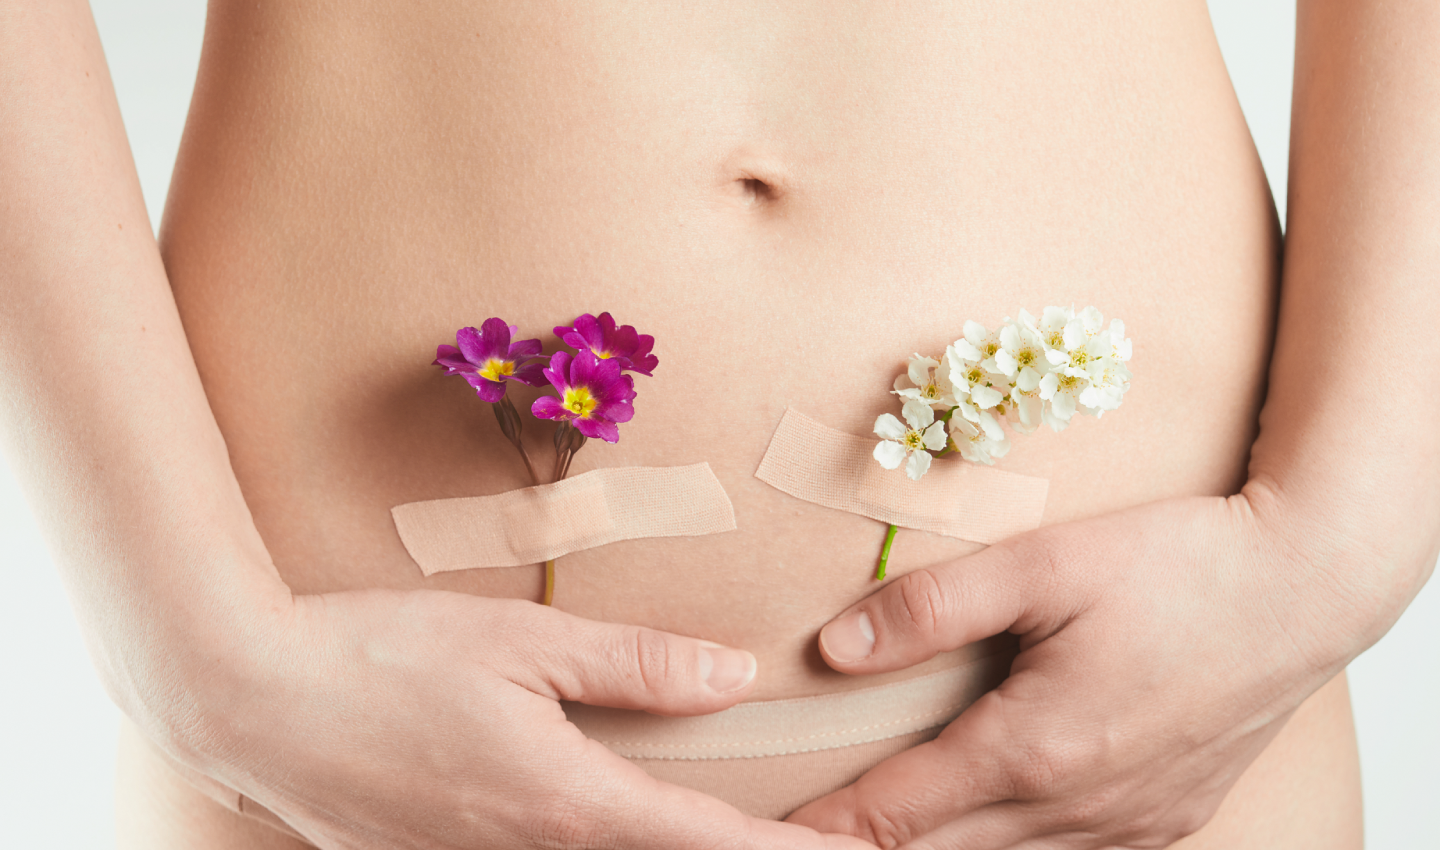 Image of a woman with a flower on her tummy, after undergoing postpartum cellulite treatments to restore her confidence.